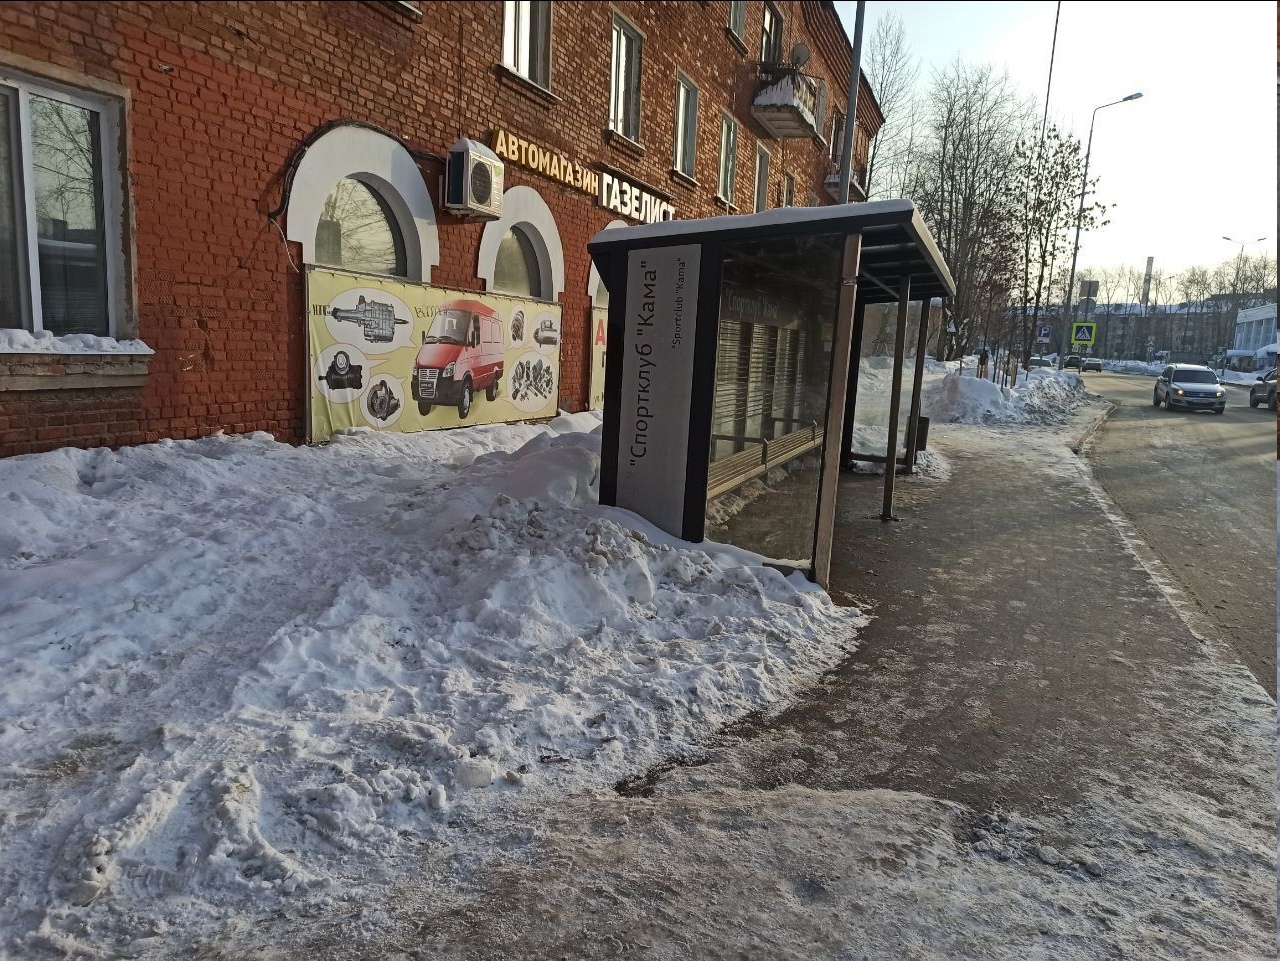 Judging by the photo, for some reason the townspeople preferred to bypass the stop along the snowdrift that fell from the roof behind the stop, instead of taking advantage of the perfectly cleared space in front of it